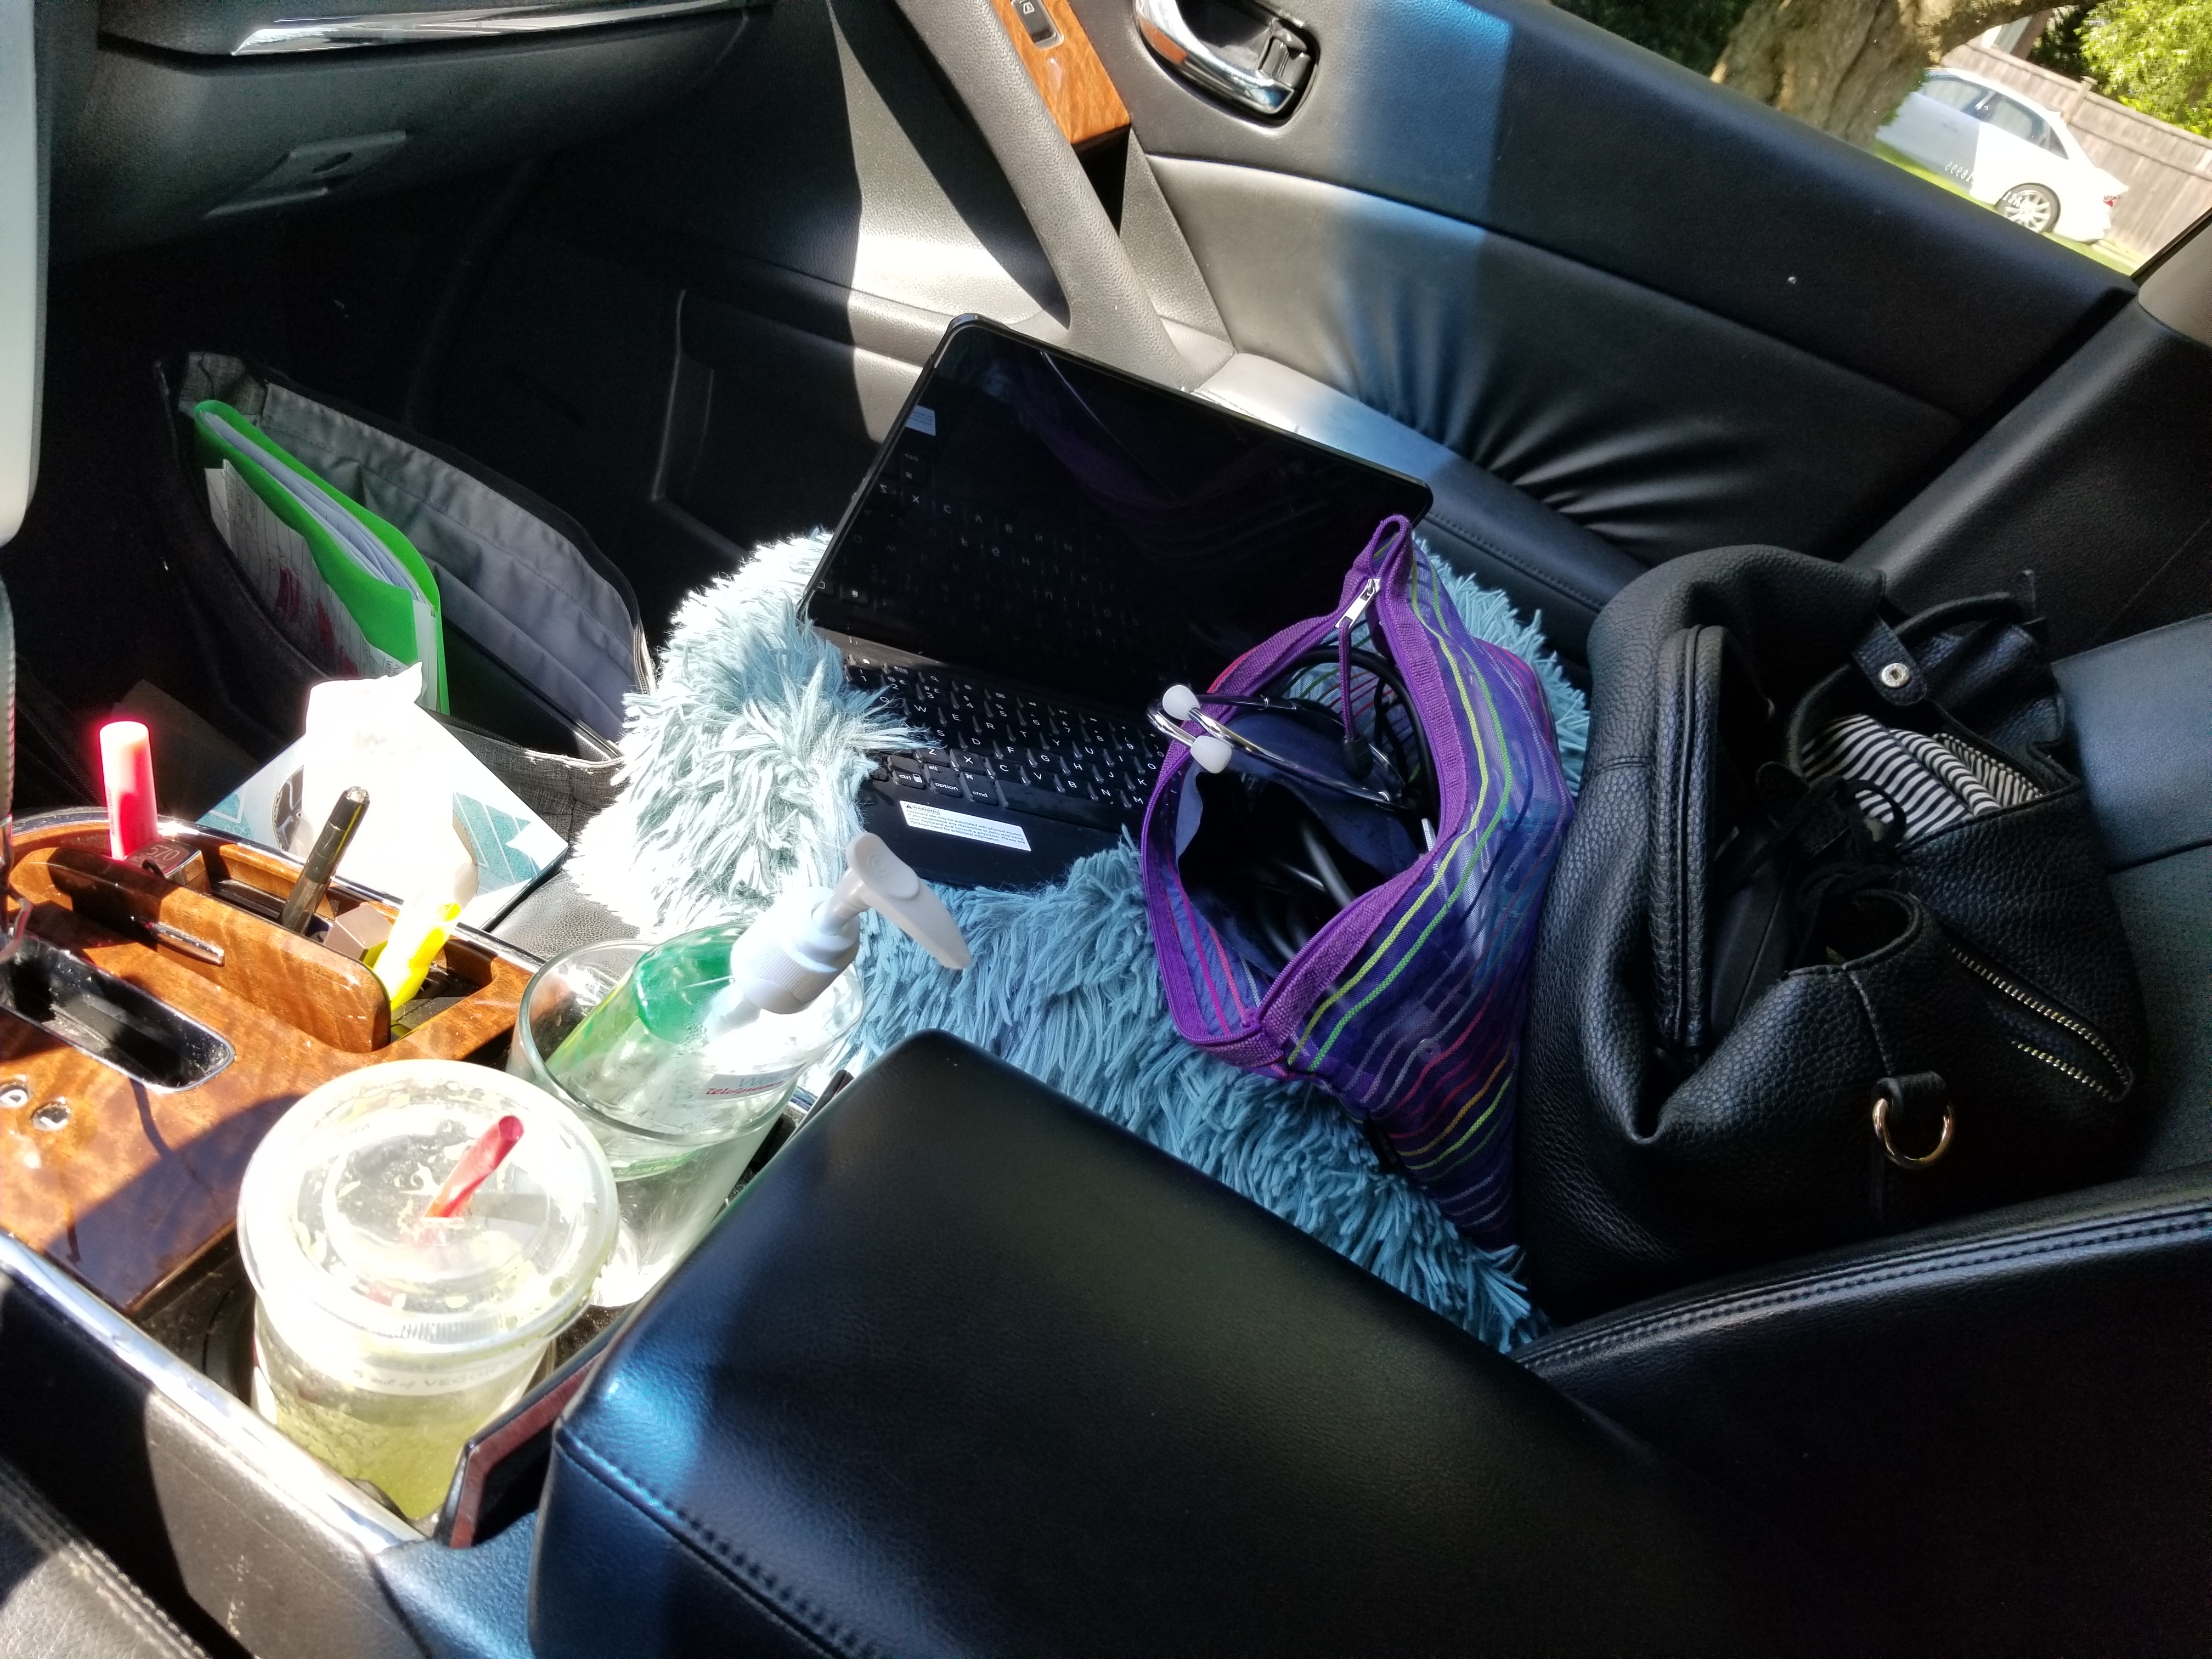 Messy Car: Unfiltered Real Life. How Vulnerable Are You? - Very Viv